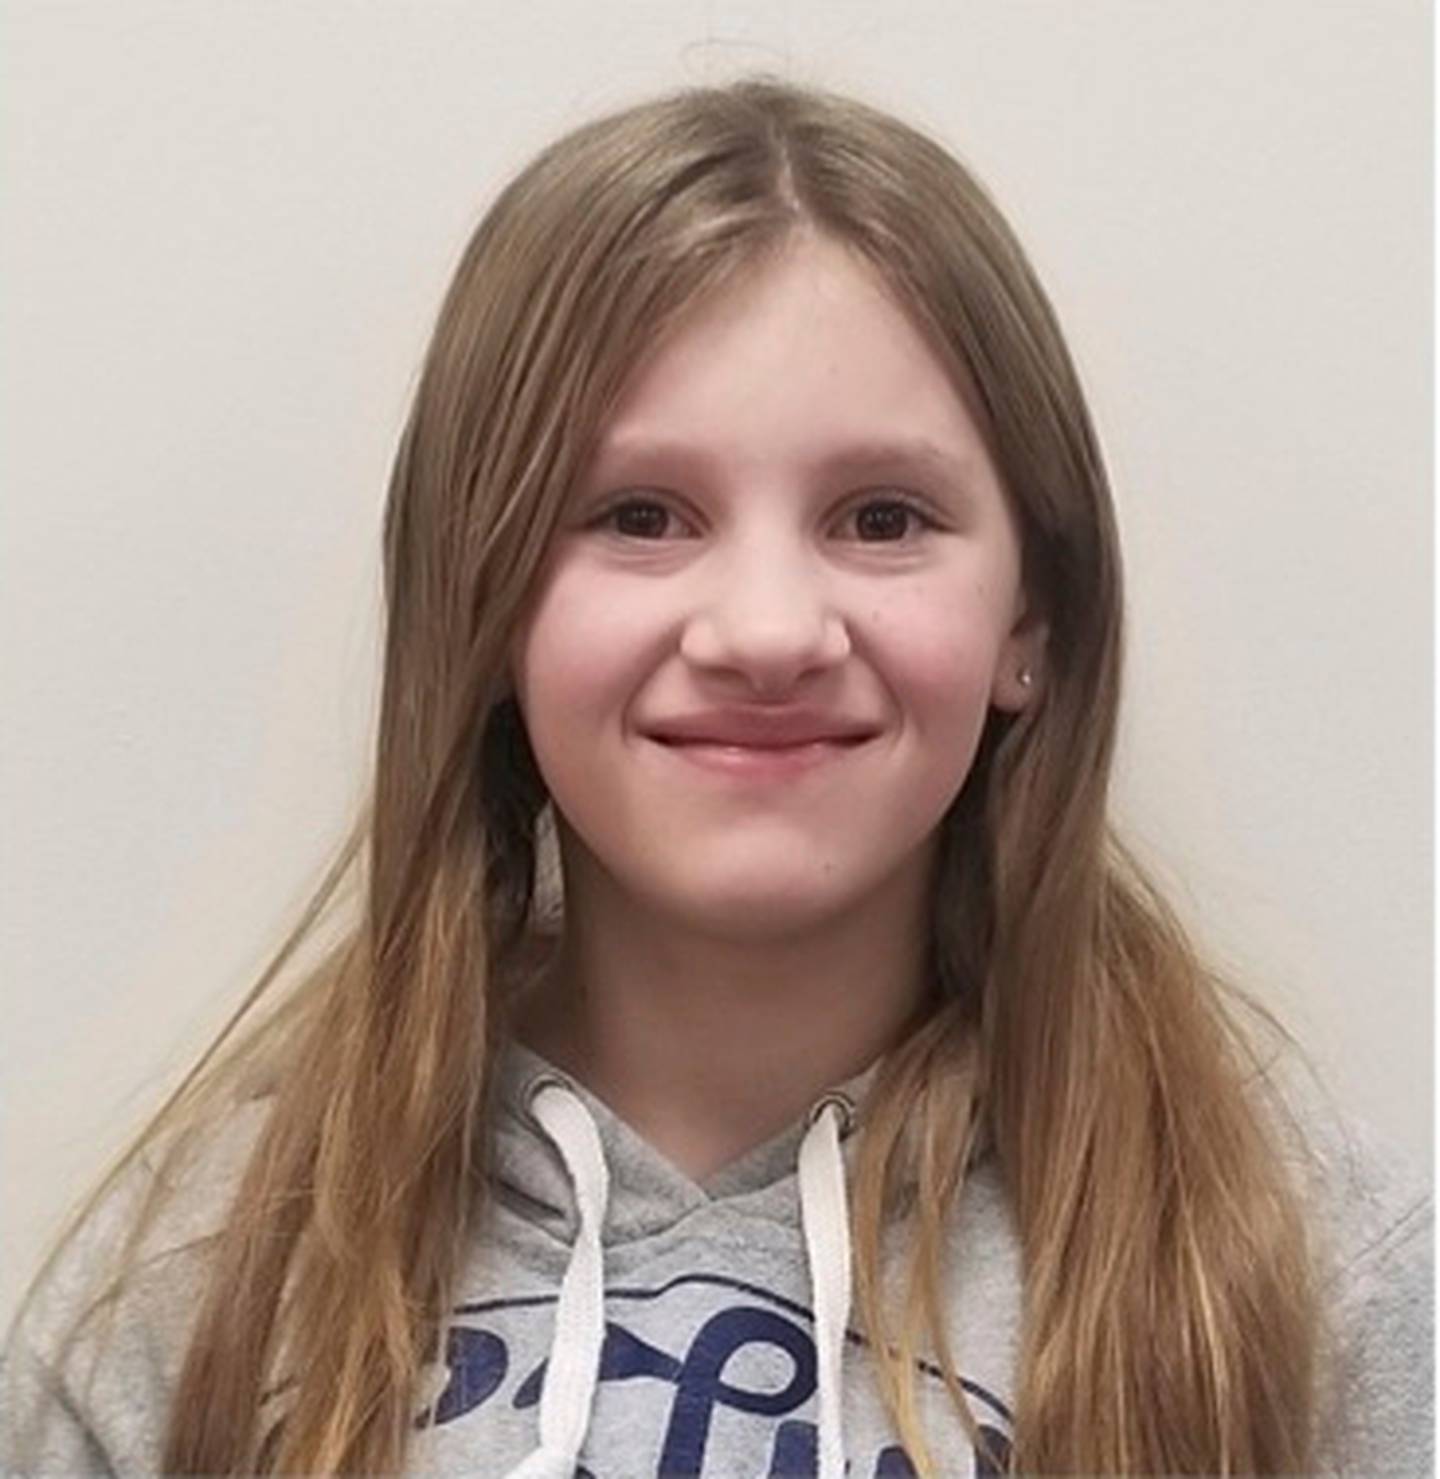 Sycamore Middle School Student of the Month for January